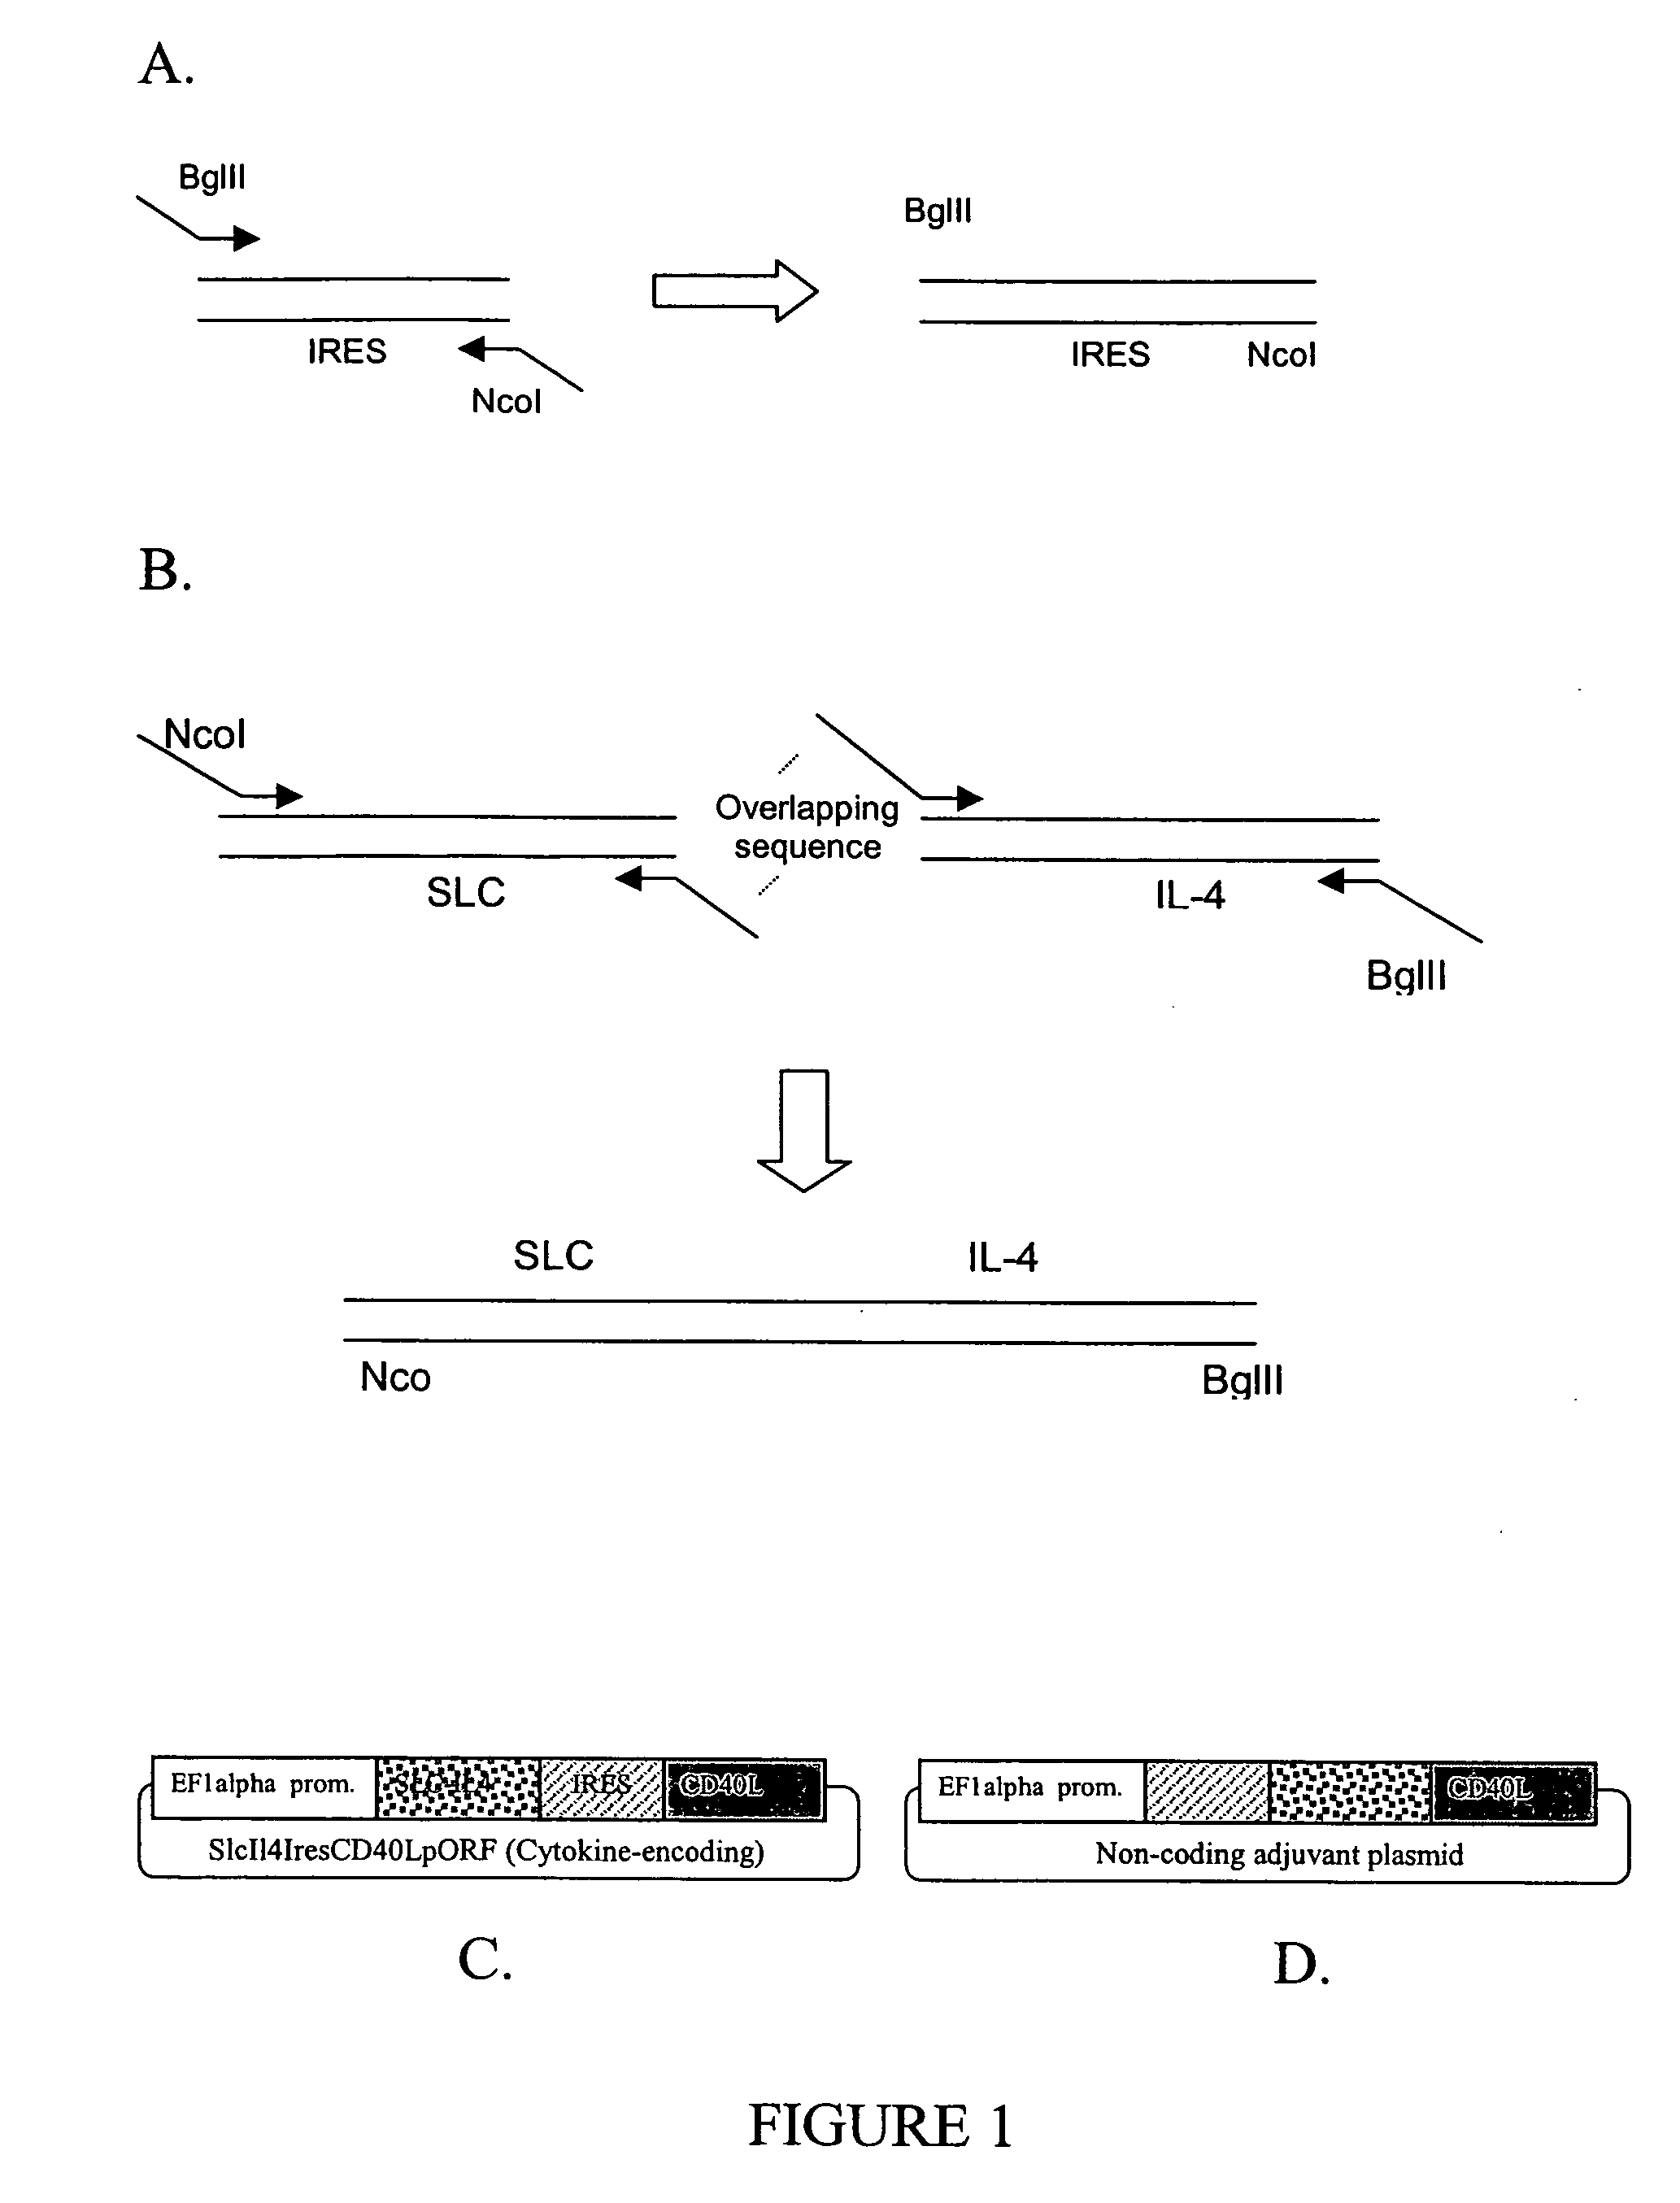 Bacterial plasmid with immunological adjuvant function and uses thereof